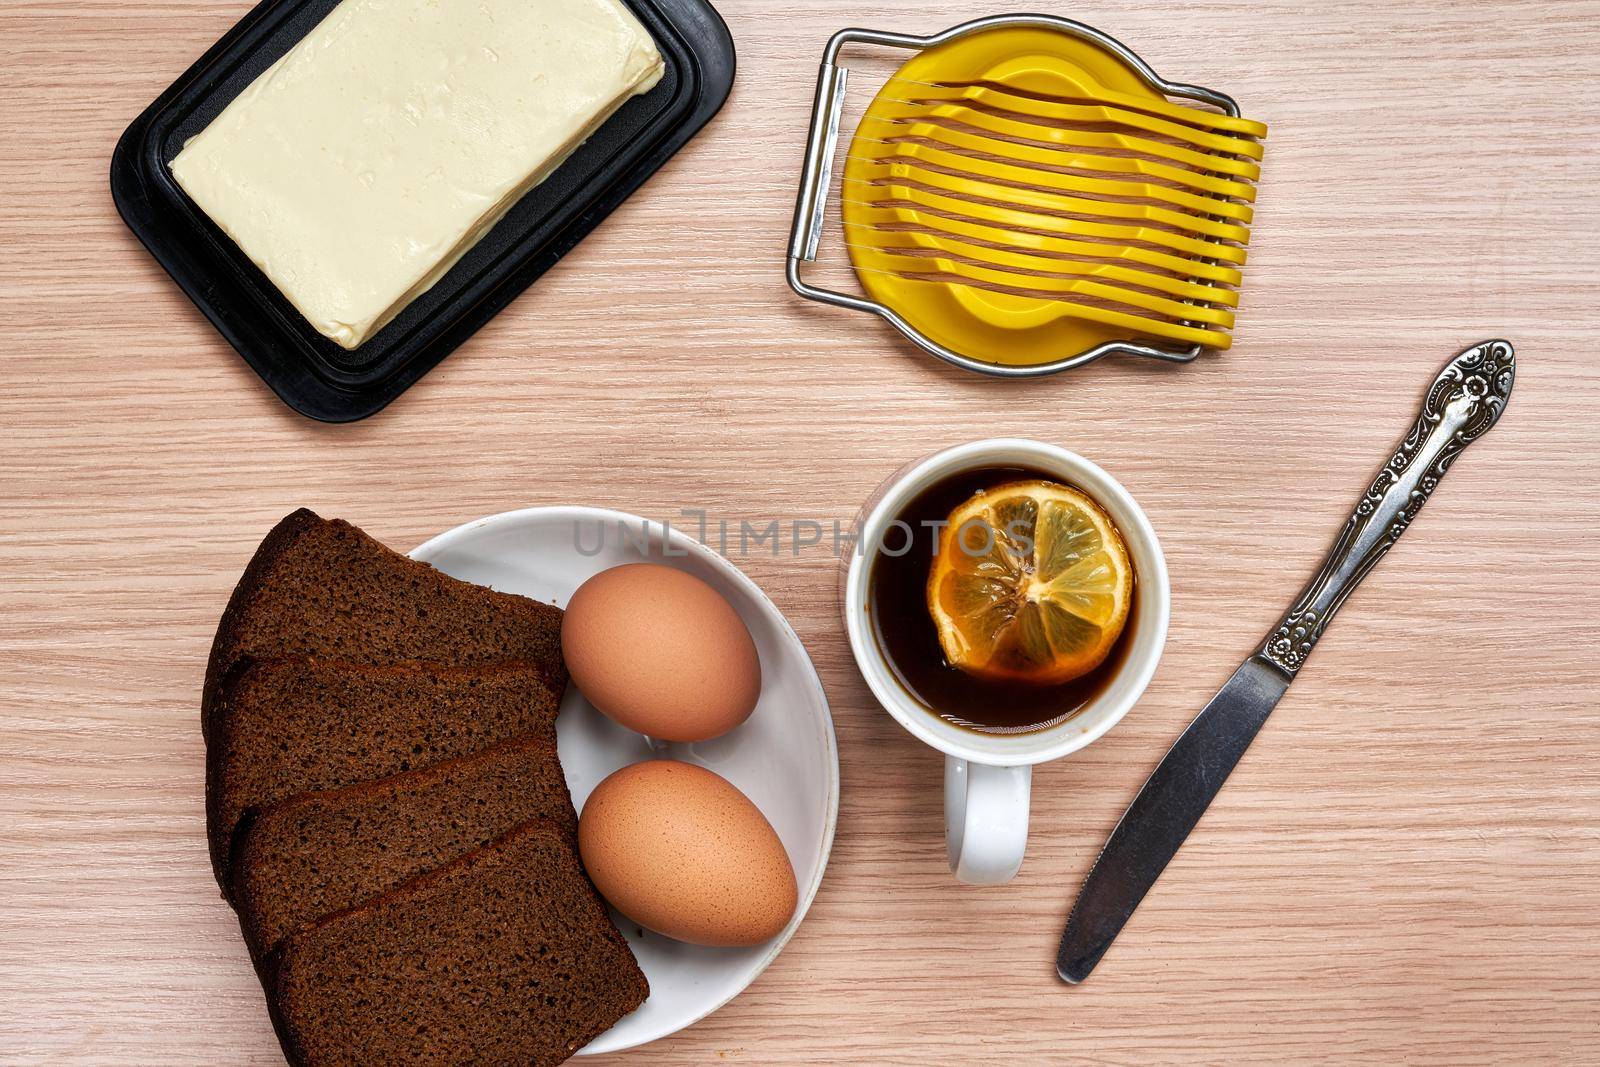 Making a breakfast sandwich, bread and butter and egg with egg cutting by vizland